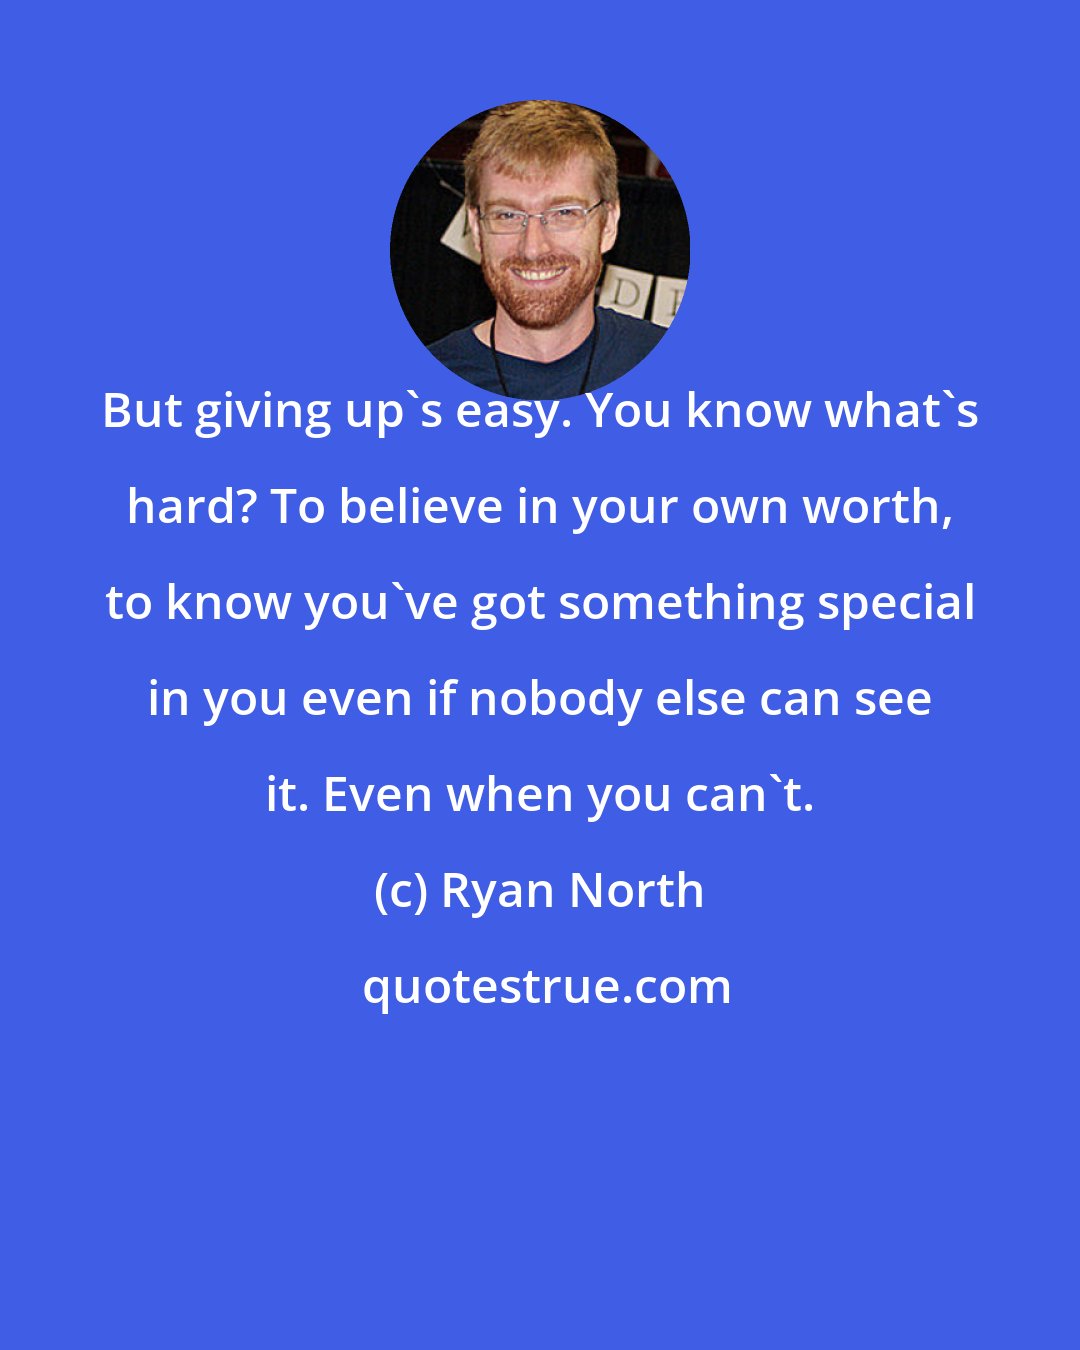 Ryan North: But giving up's easy. You know what's hard? To believe in your own worth, to know you've got something special in you even if nobody else can see it. Even when you can't.